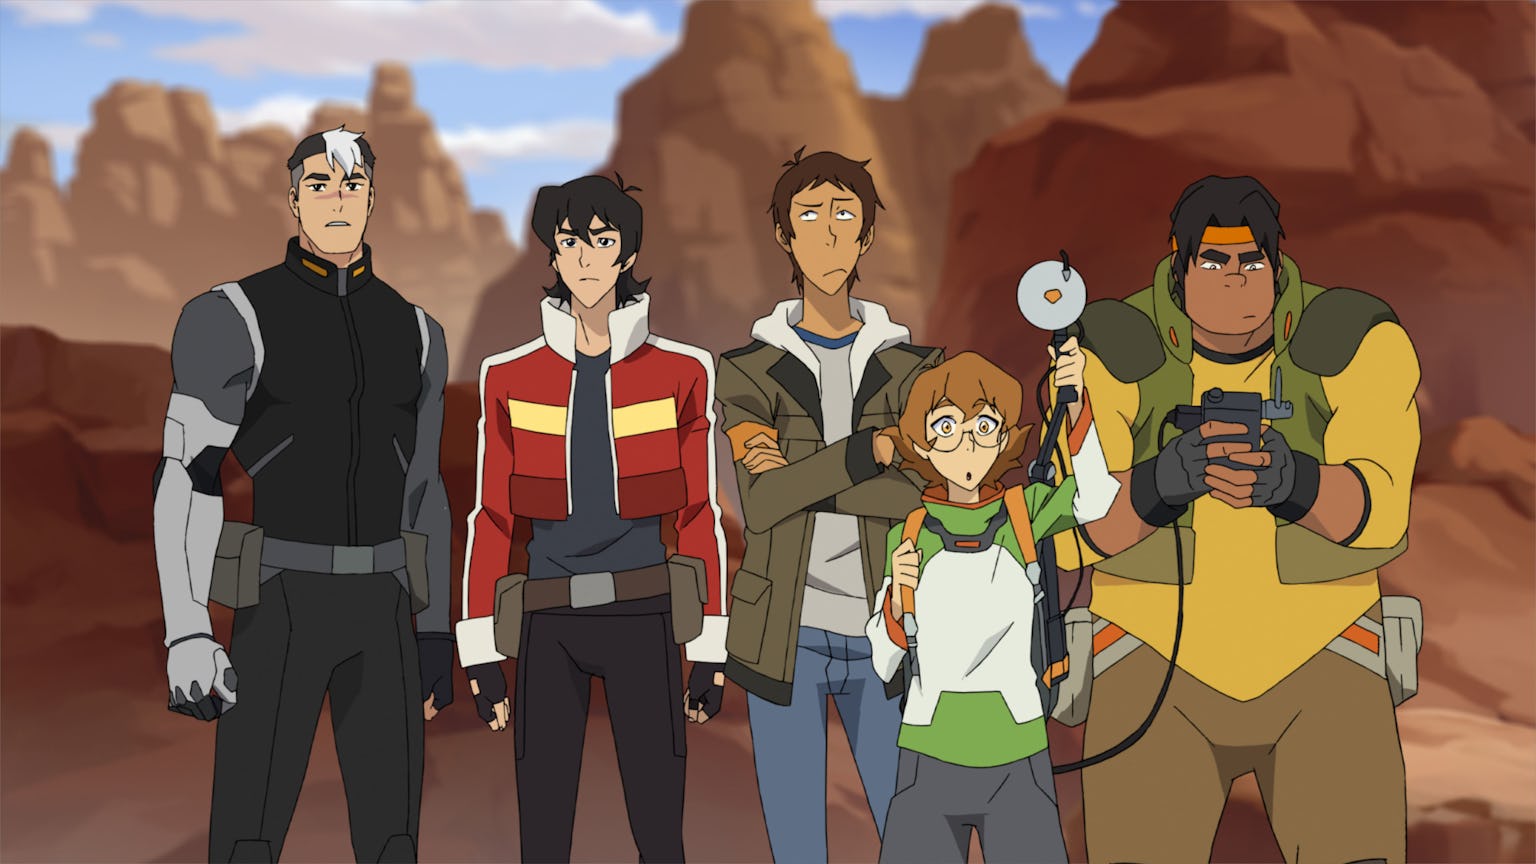 voltron-legendary-defender-is-a-perfect-reboot-according-to-twitter